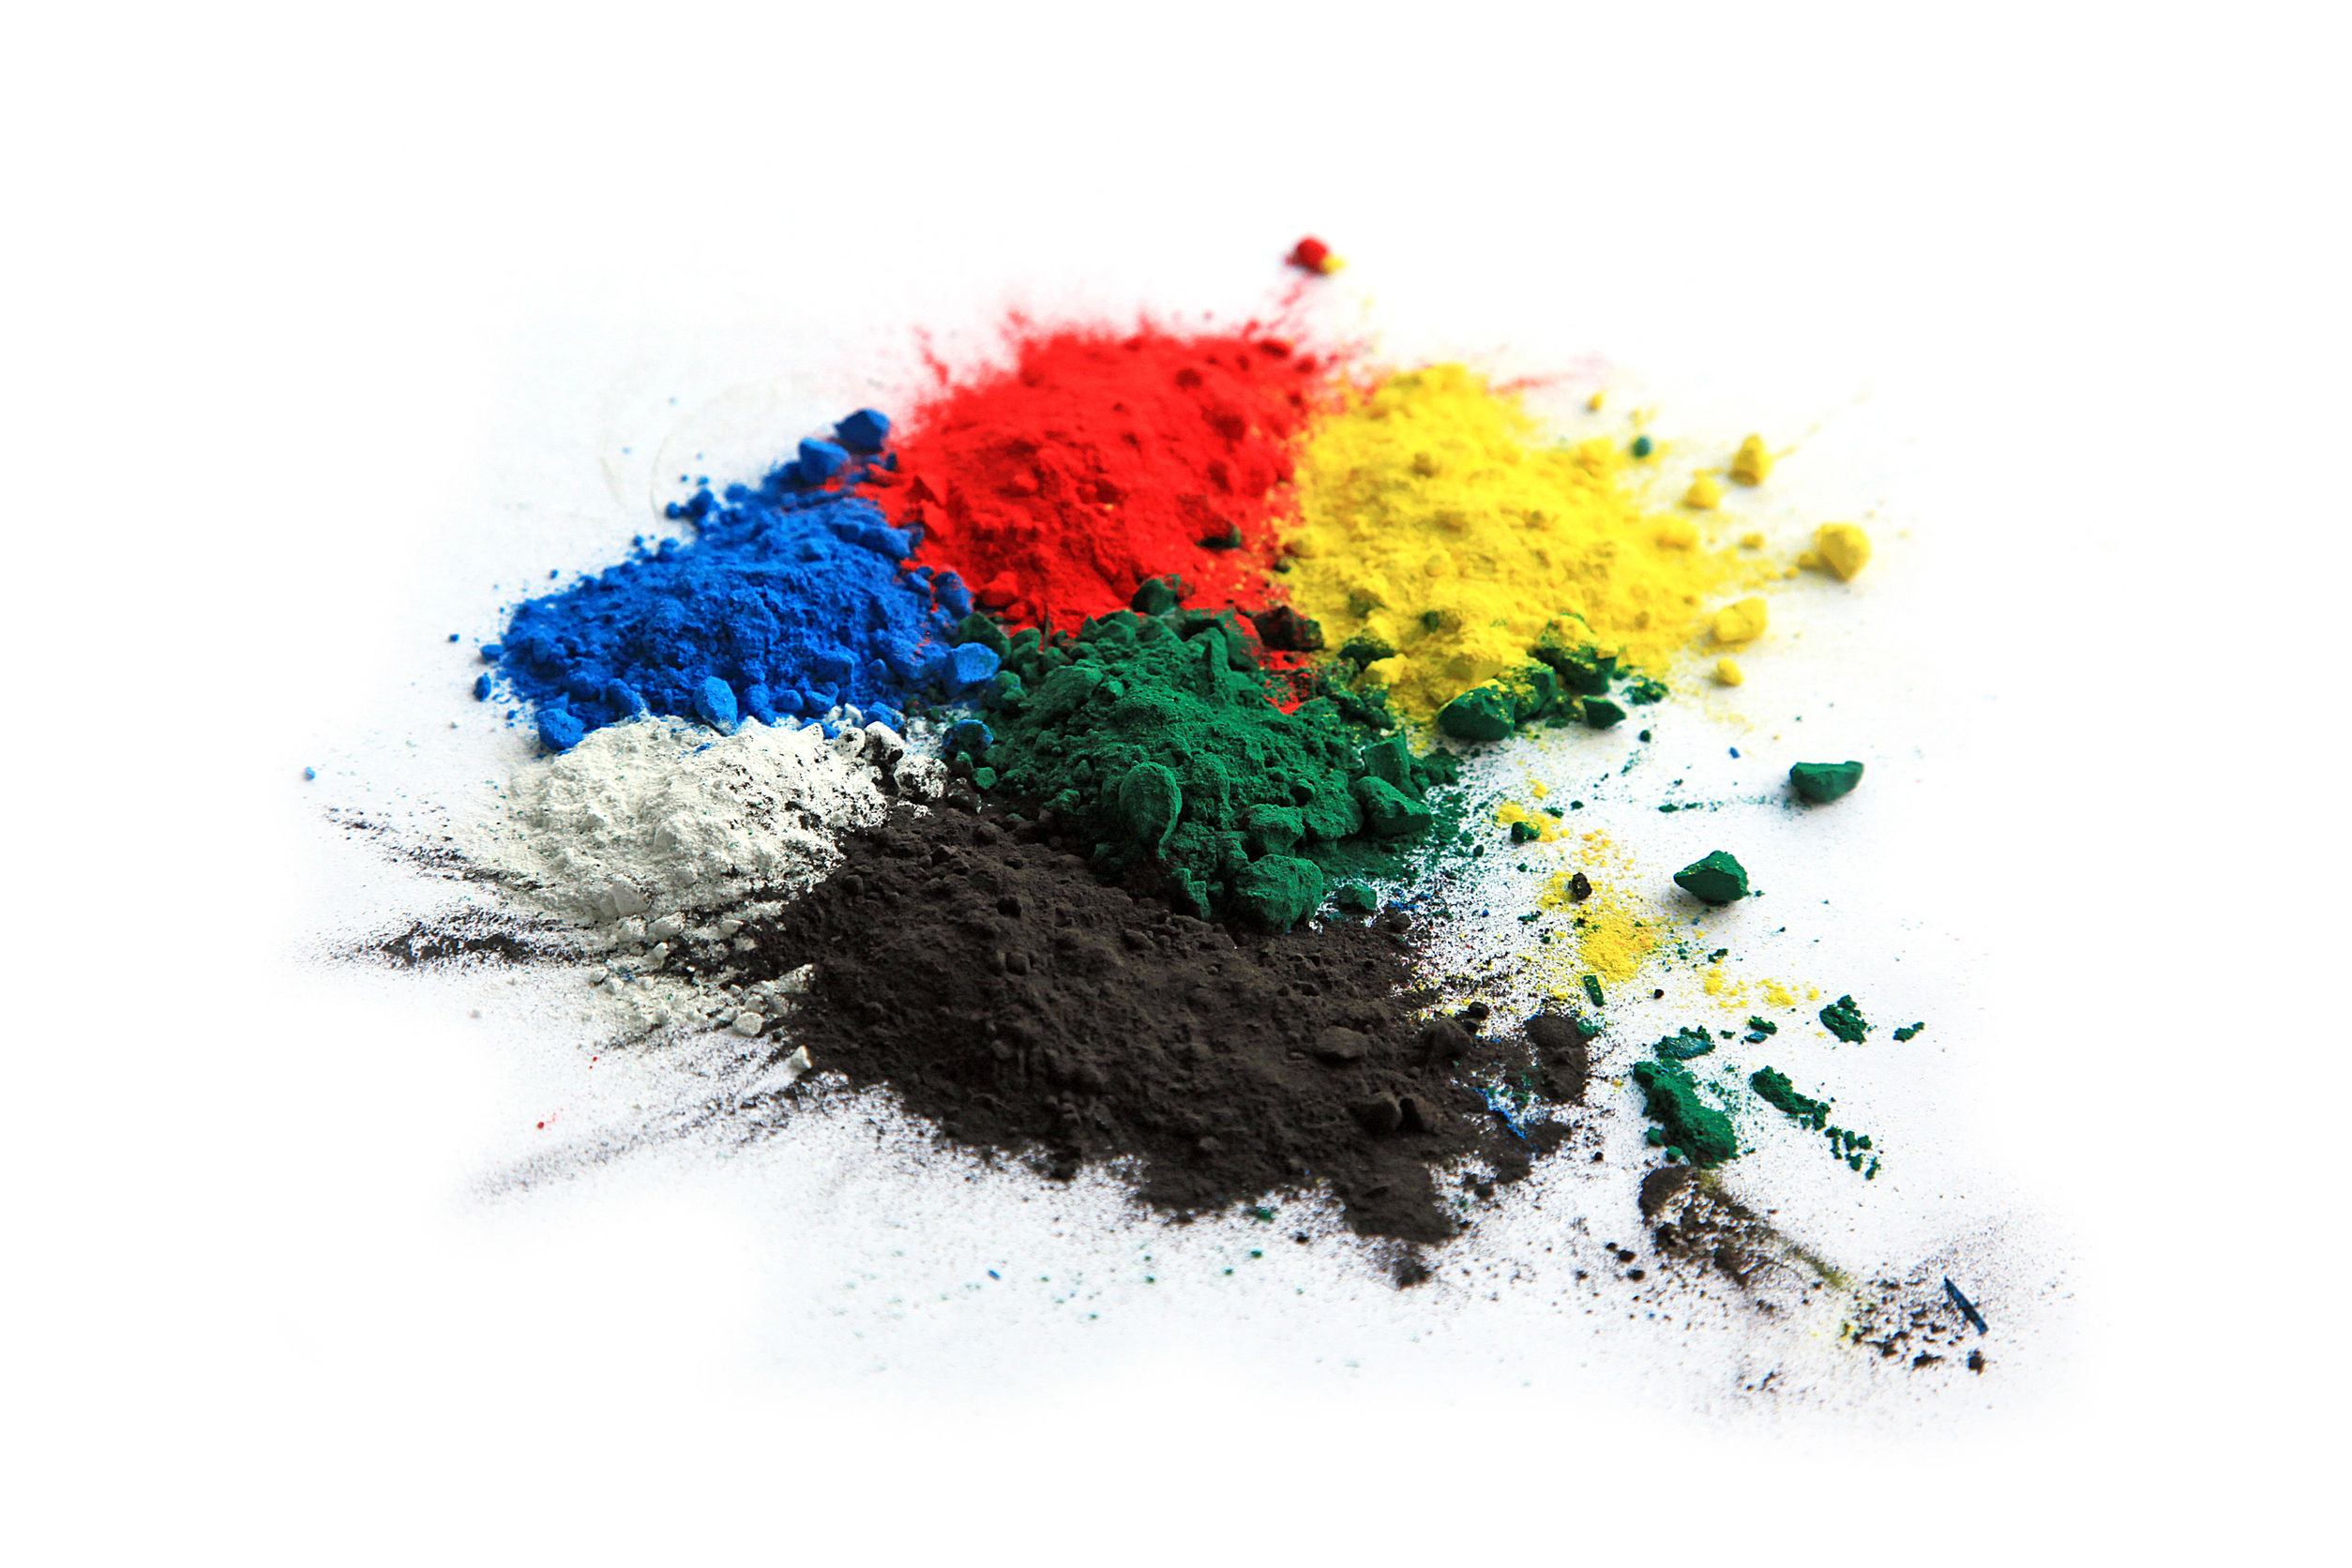 66186971 - collection of colorful powder - yellow, red, black, green, blue, white